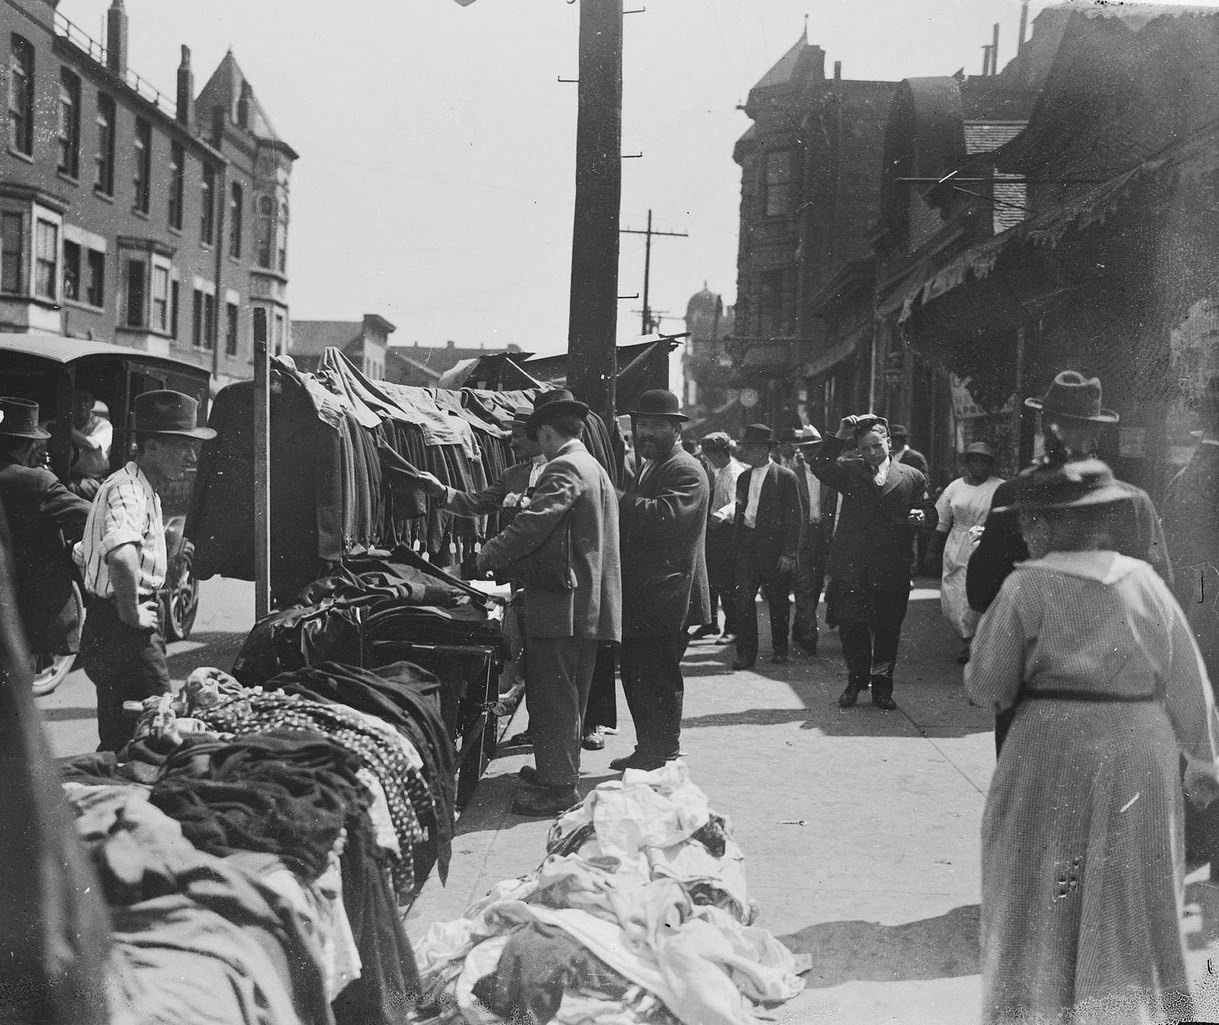 Merchants selling clothing and a group of men inspecting the goods on Maxwell Street at the Sunday market in the city's Jewish community located in the Near West Side community area, Chicago, Illinois, 1917.